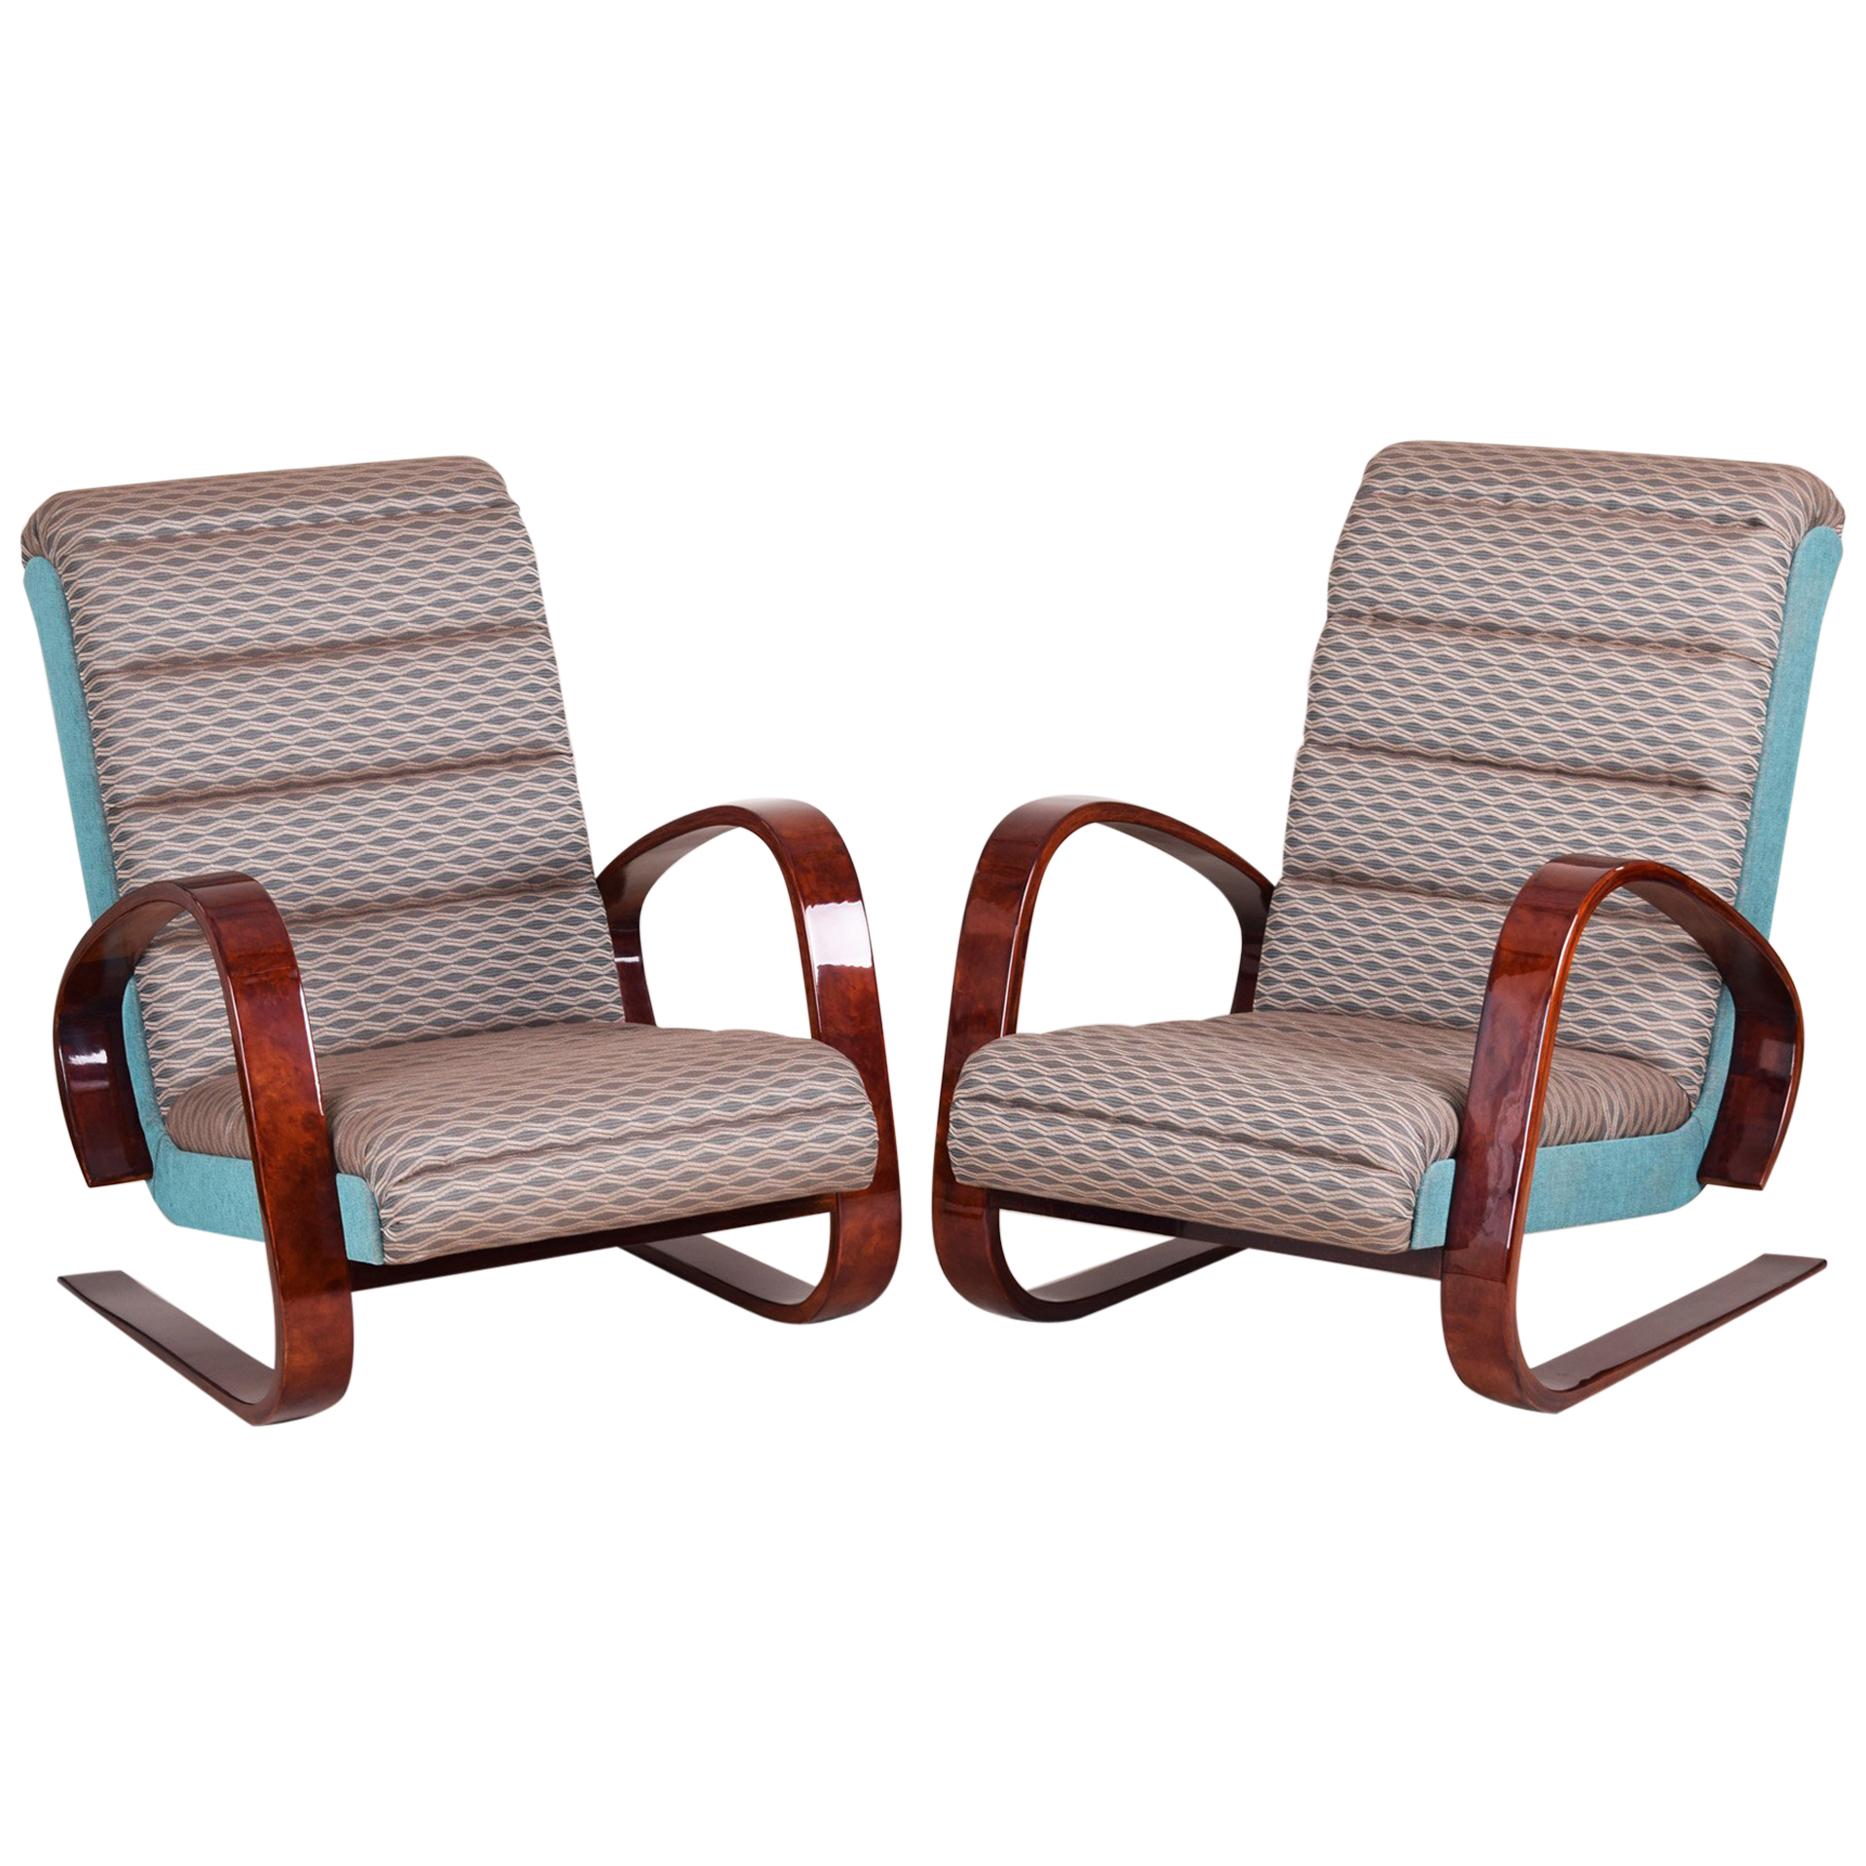 Completely Restored Pair of Walnut Art Deco Armchairs by Miroslav Navrátil For Sale